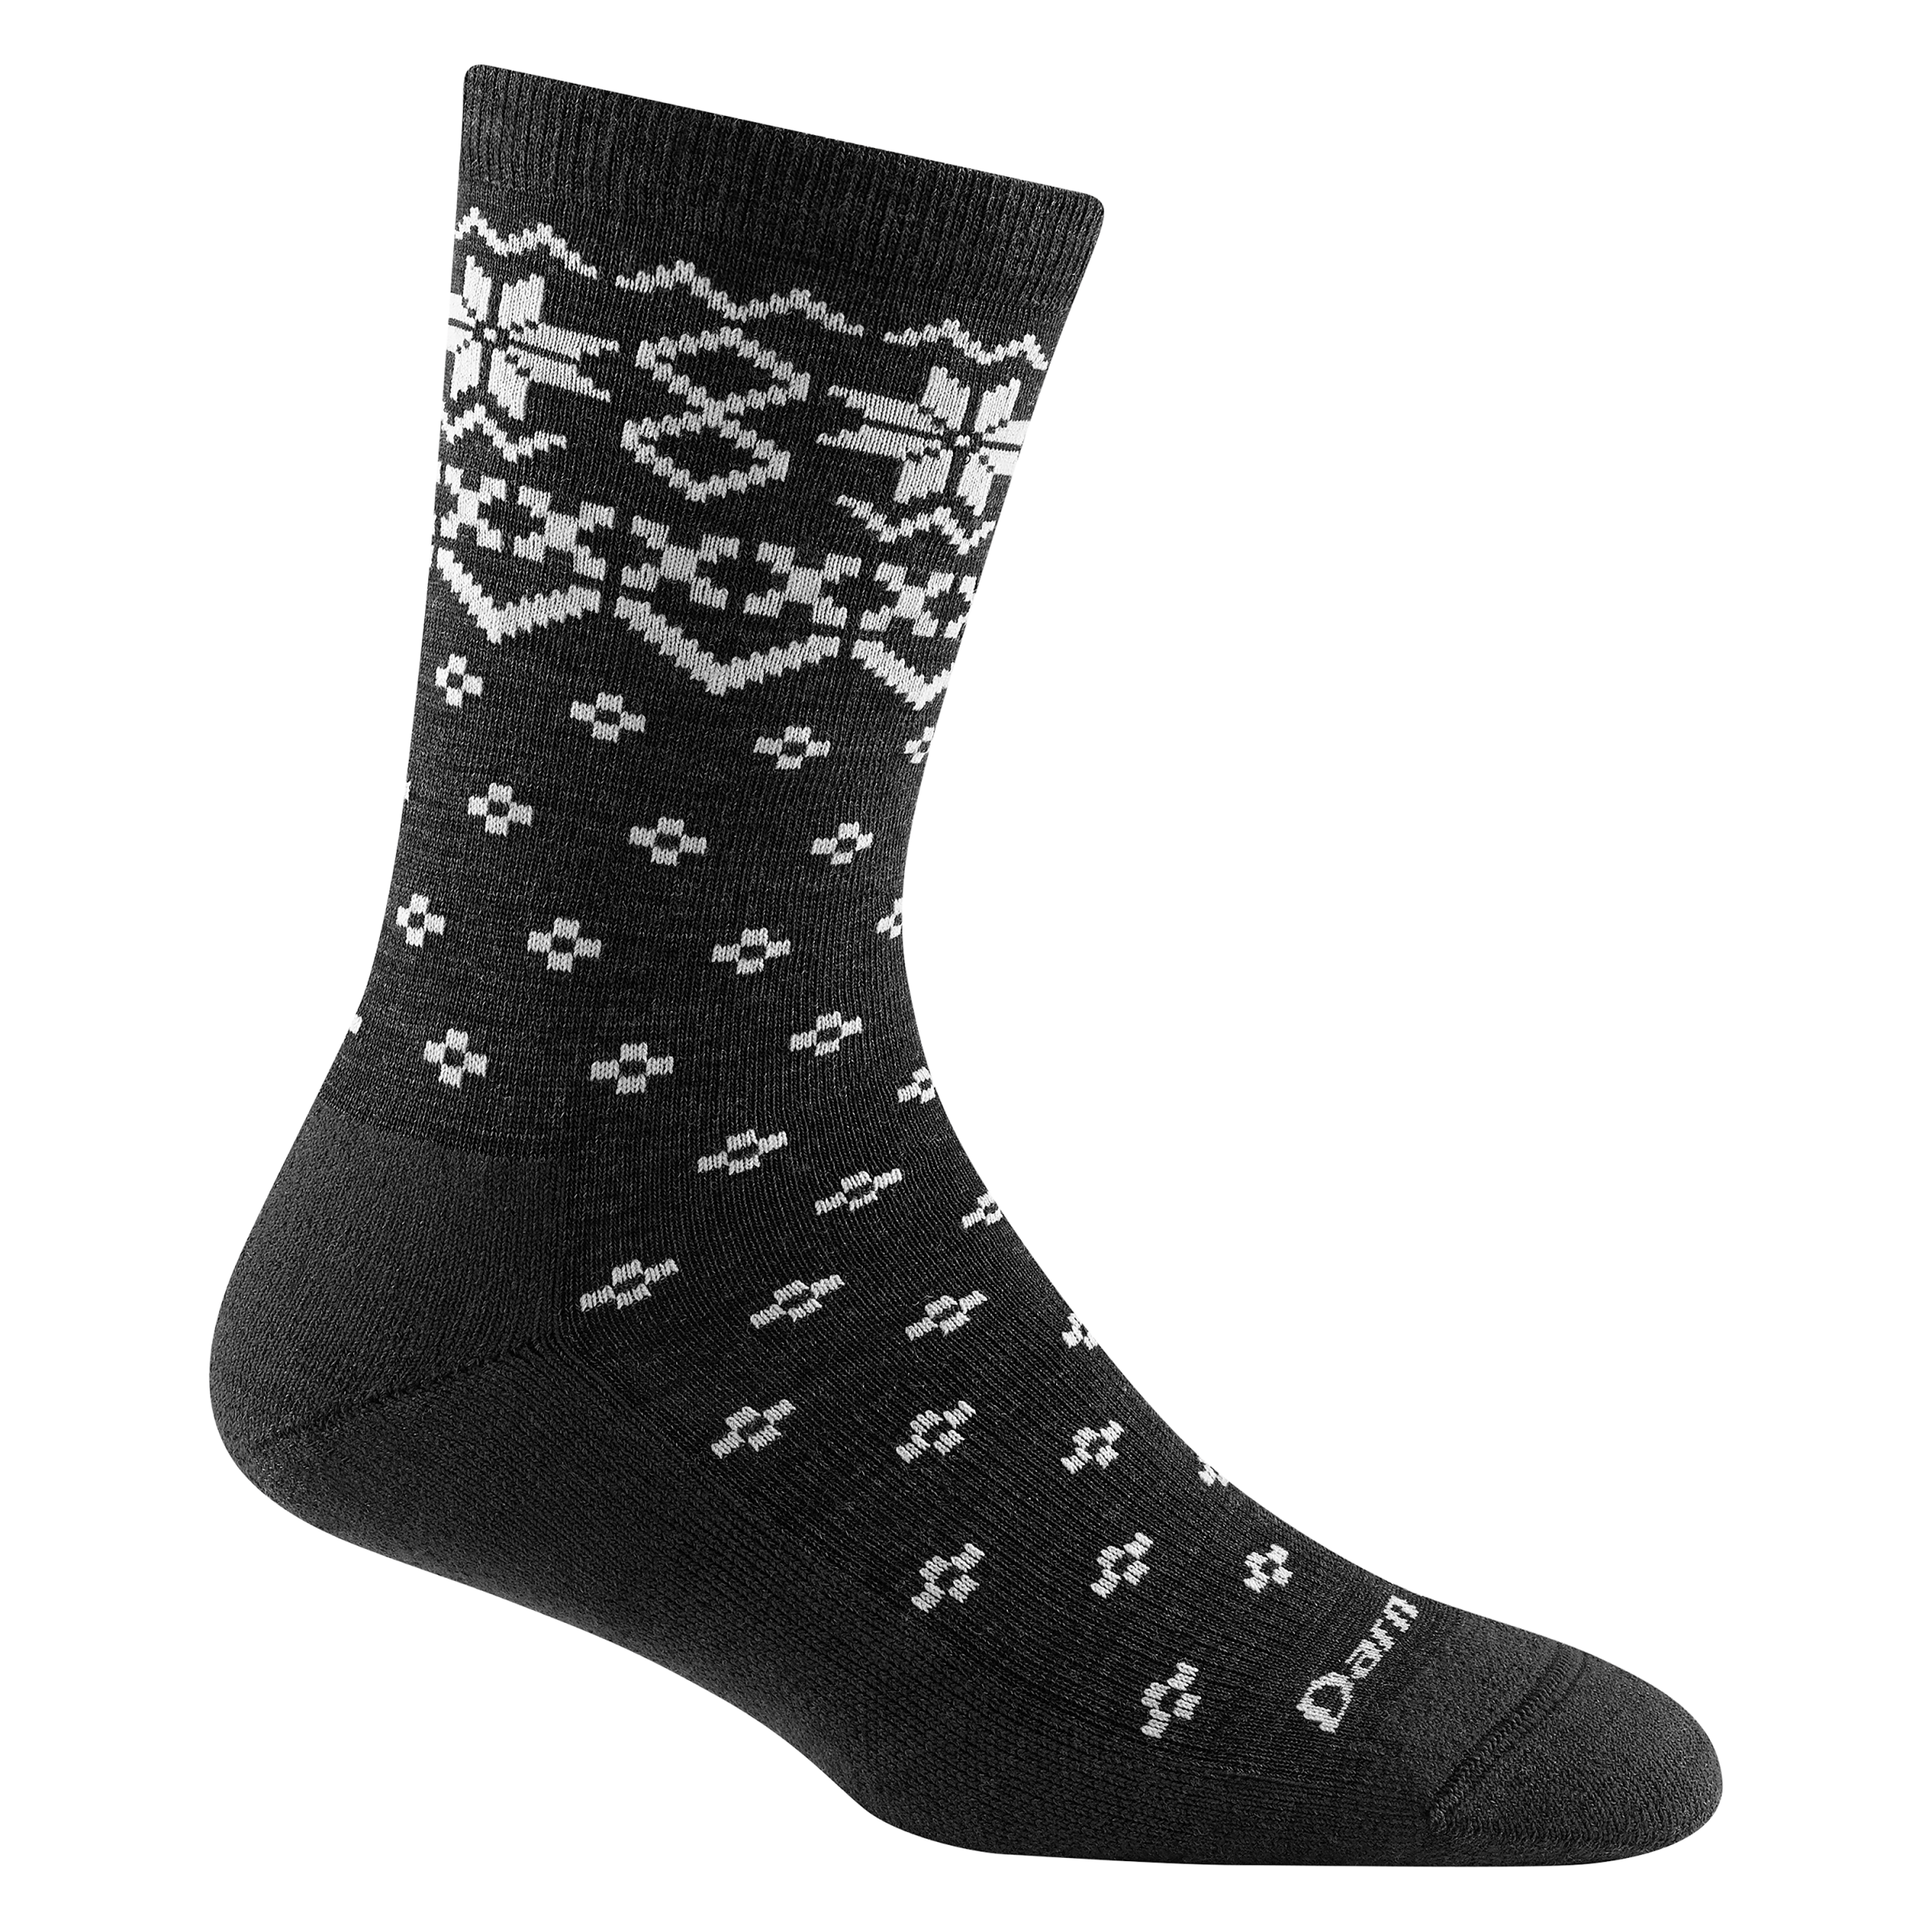 6088 women's shetland crew lifestyle sock in color charcoal gray with white traditional holiday print